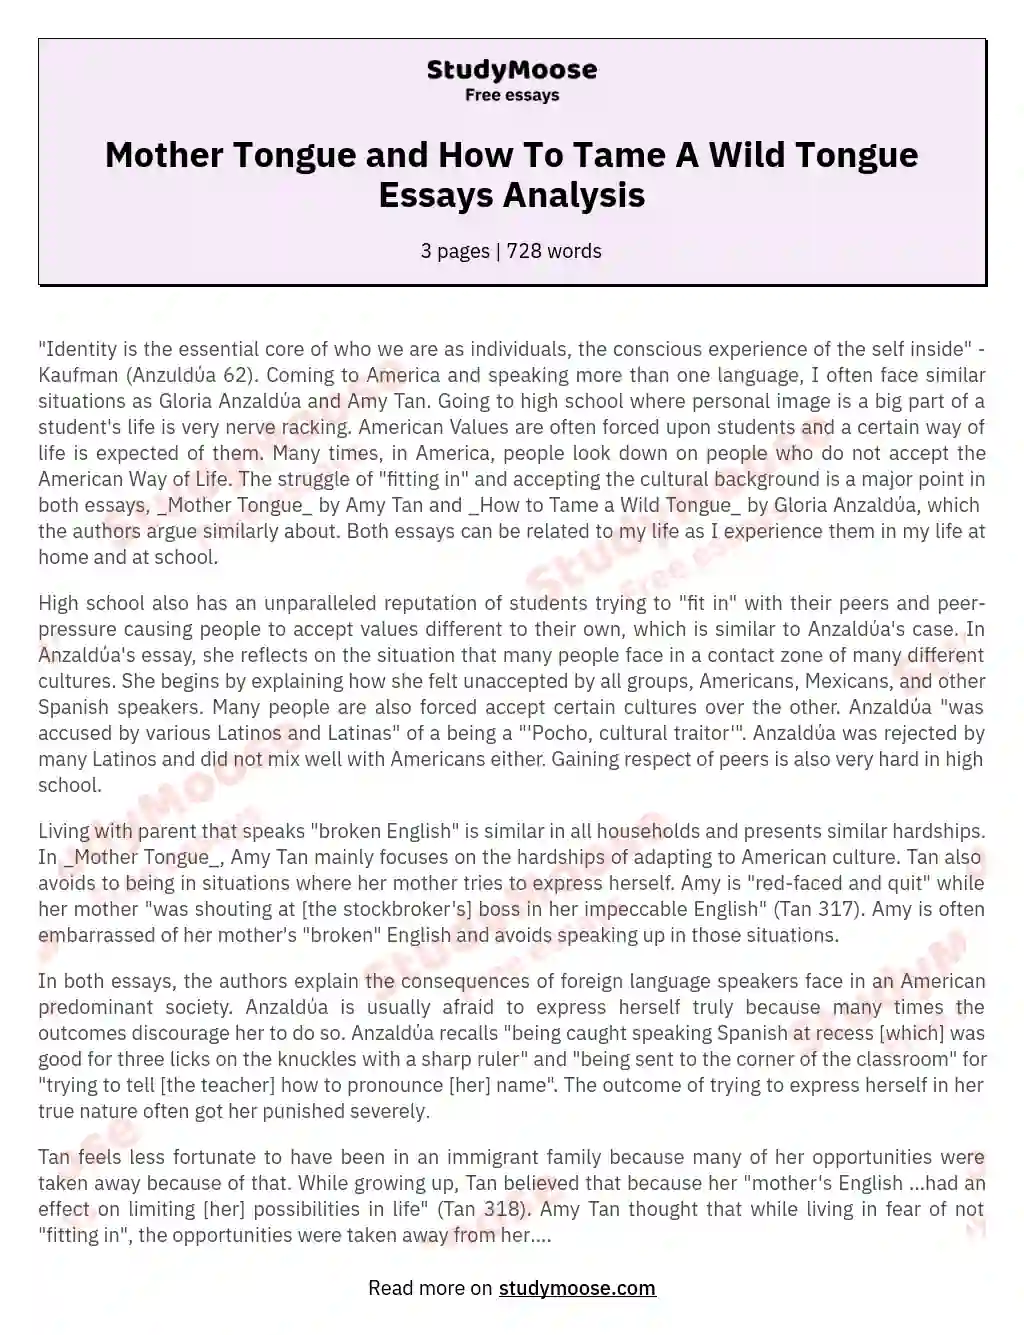 Mother Tongue and How To Tame A Wild Tongue Essays Analysis